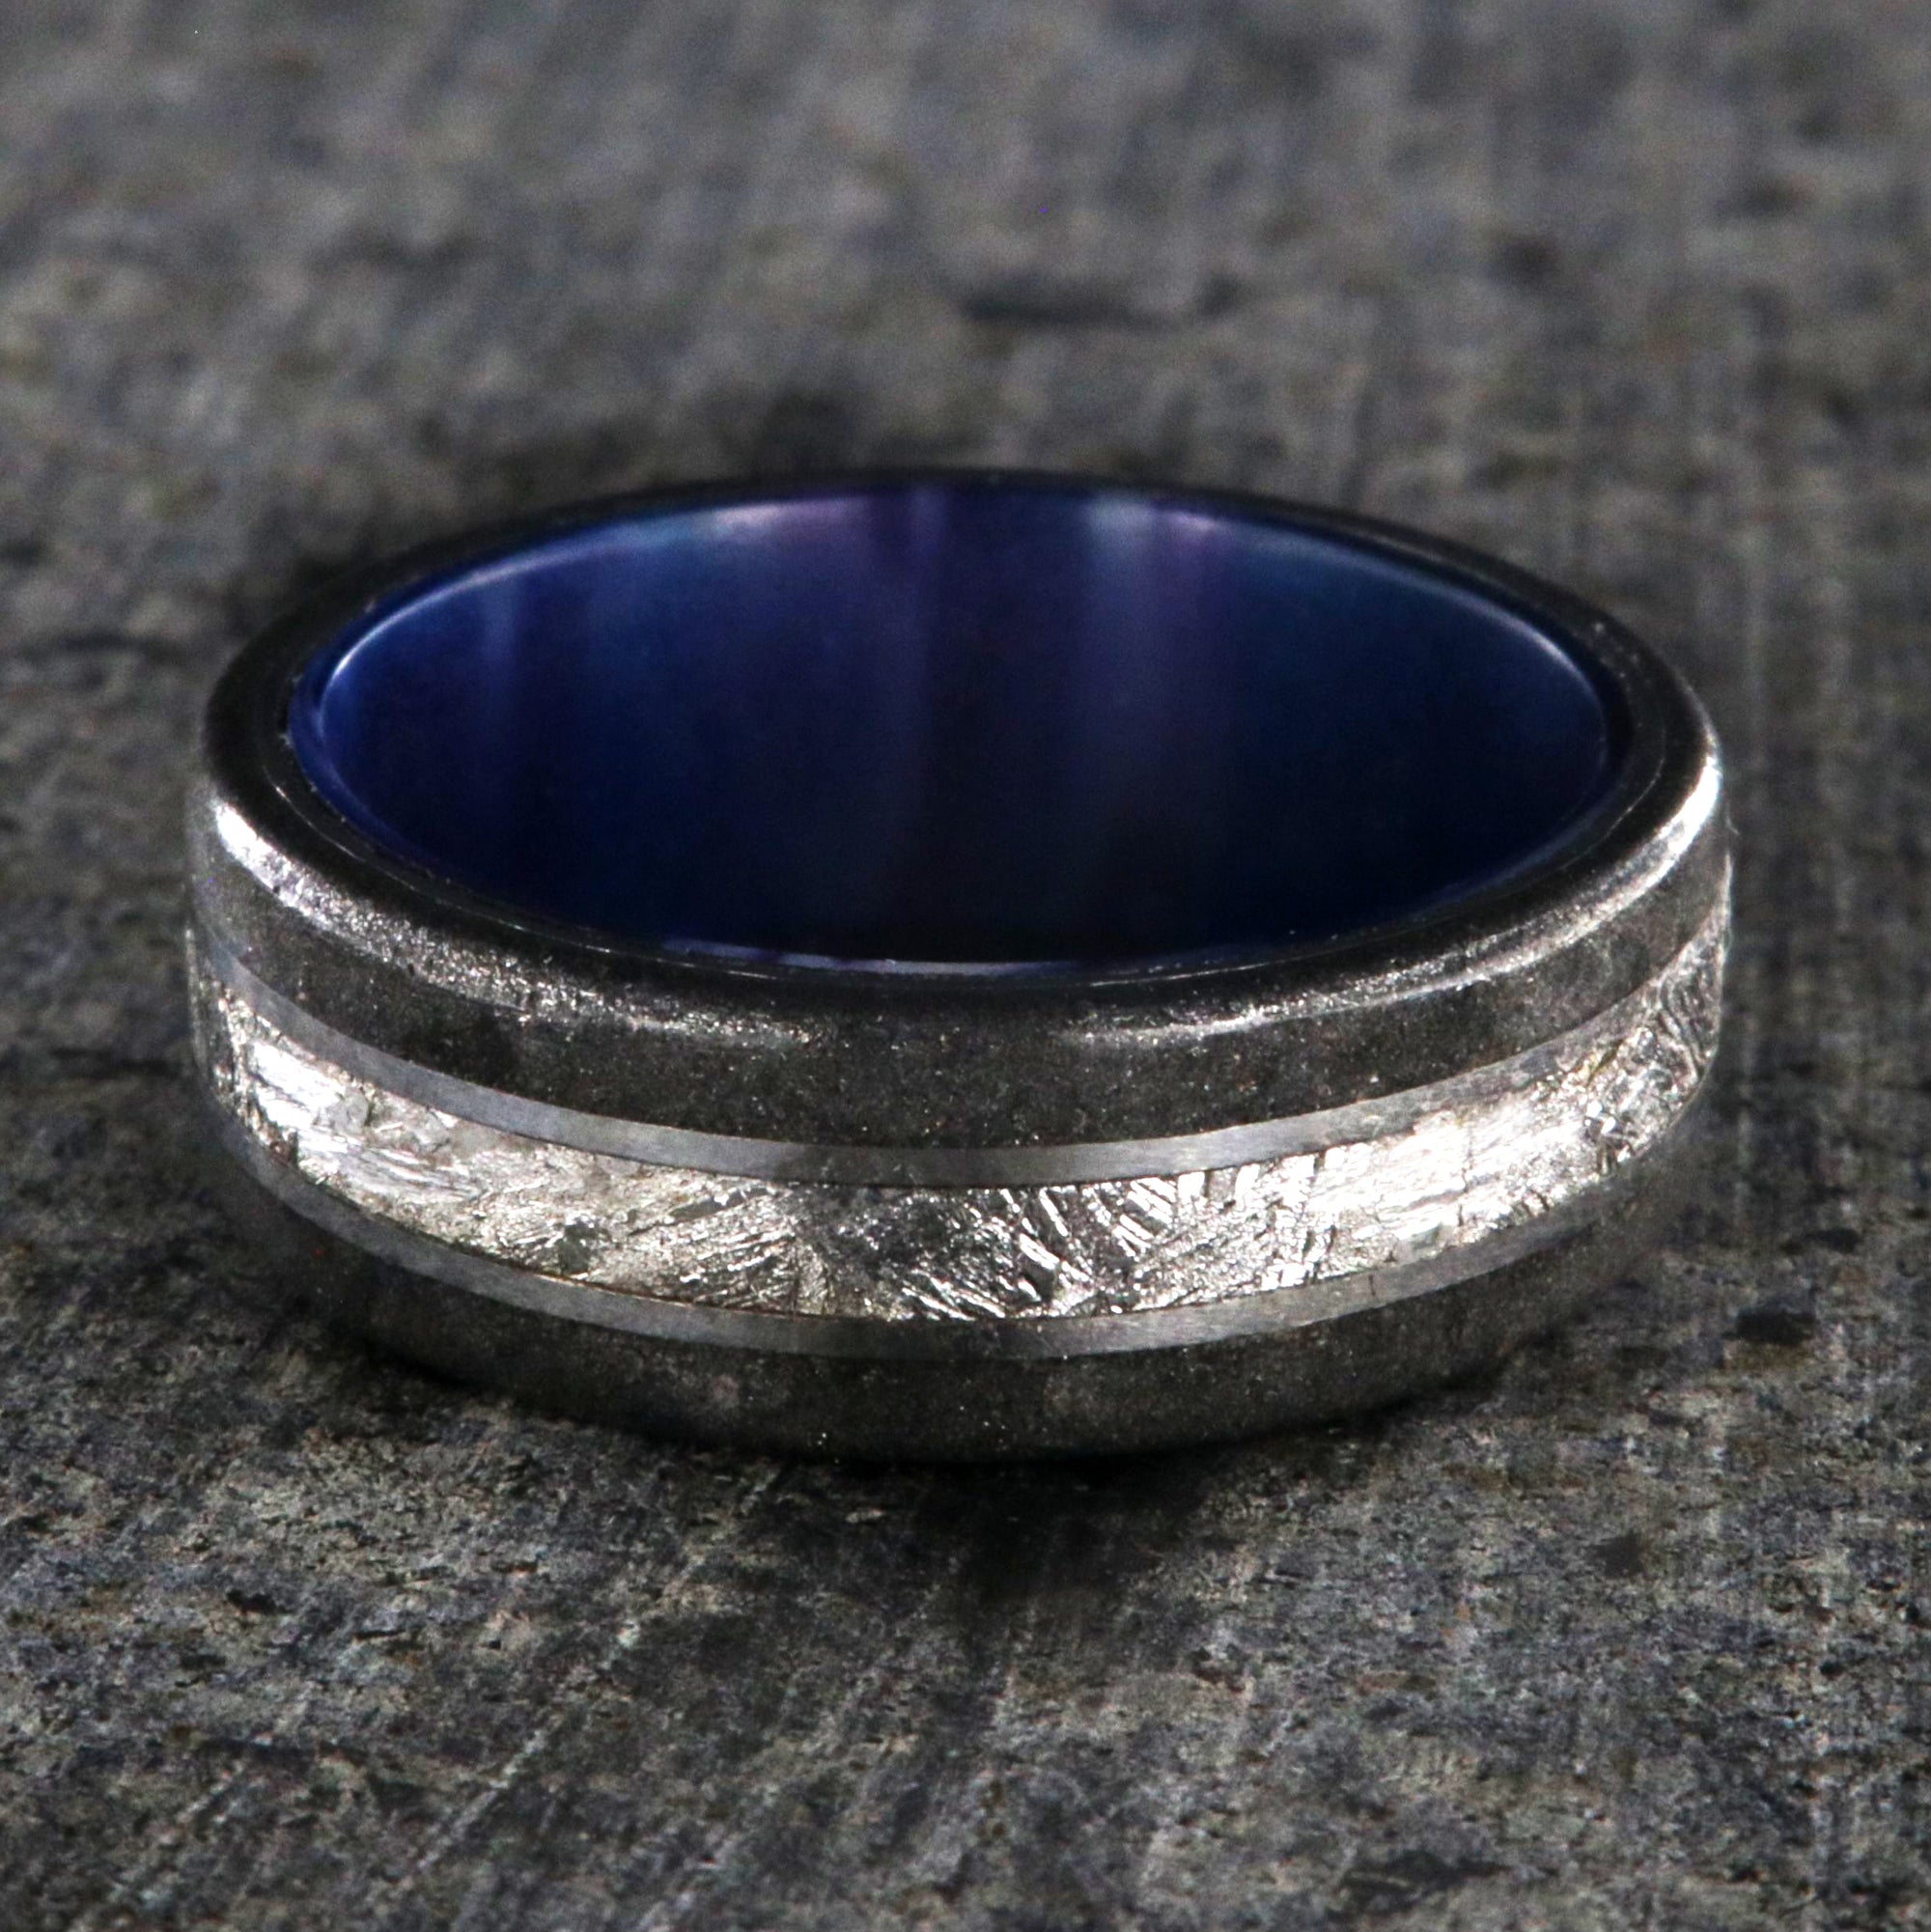 8mm wide meteorite and stardust ring with purple-blue sleeve